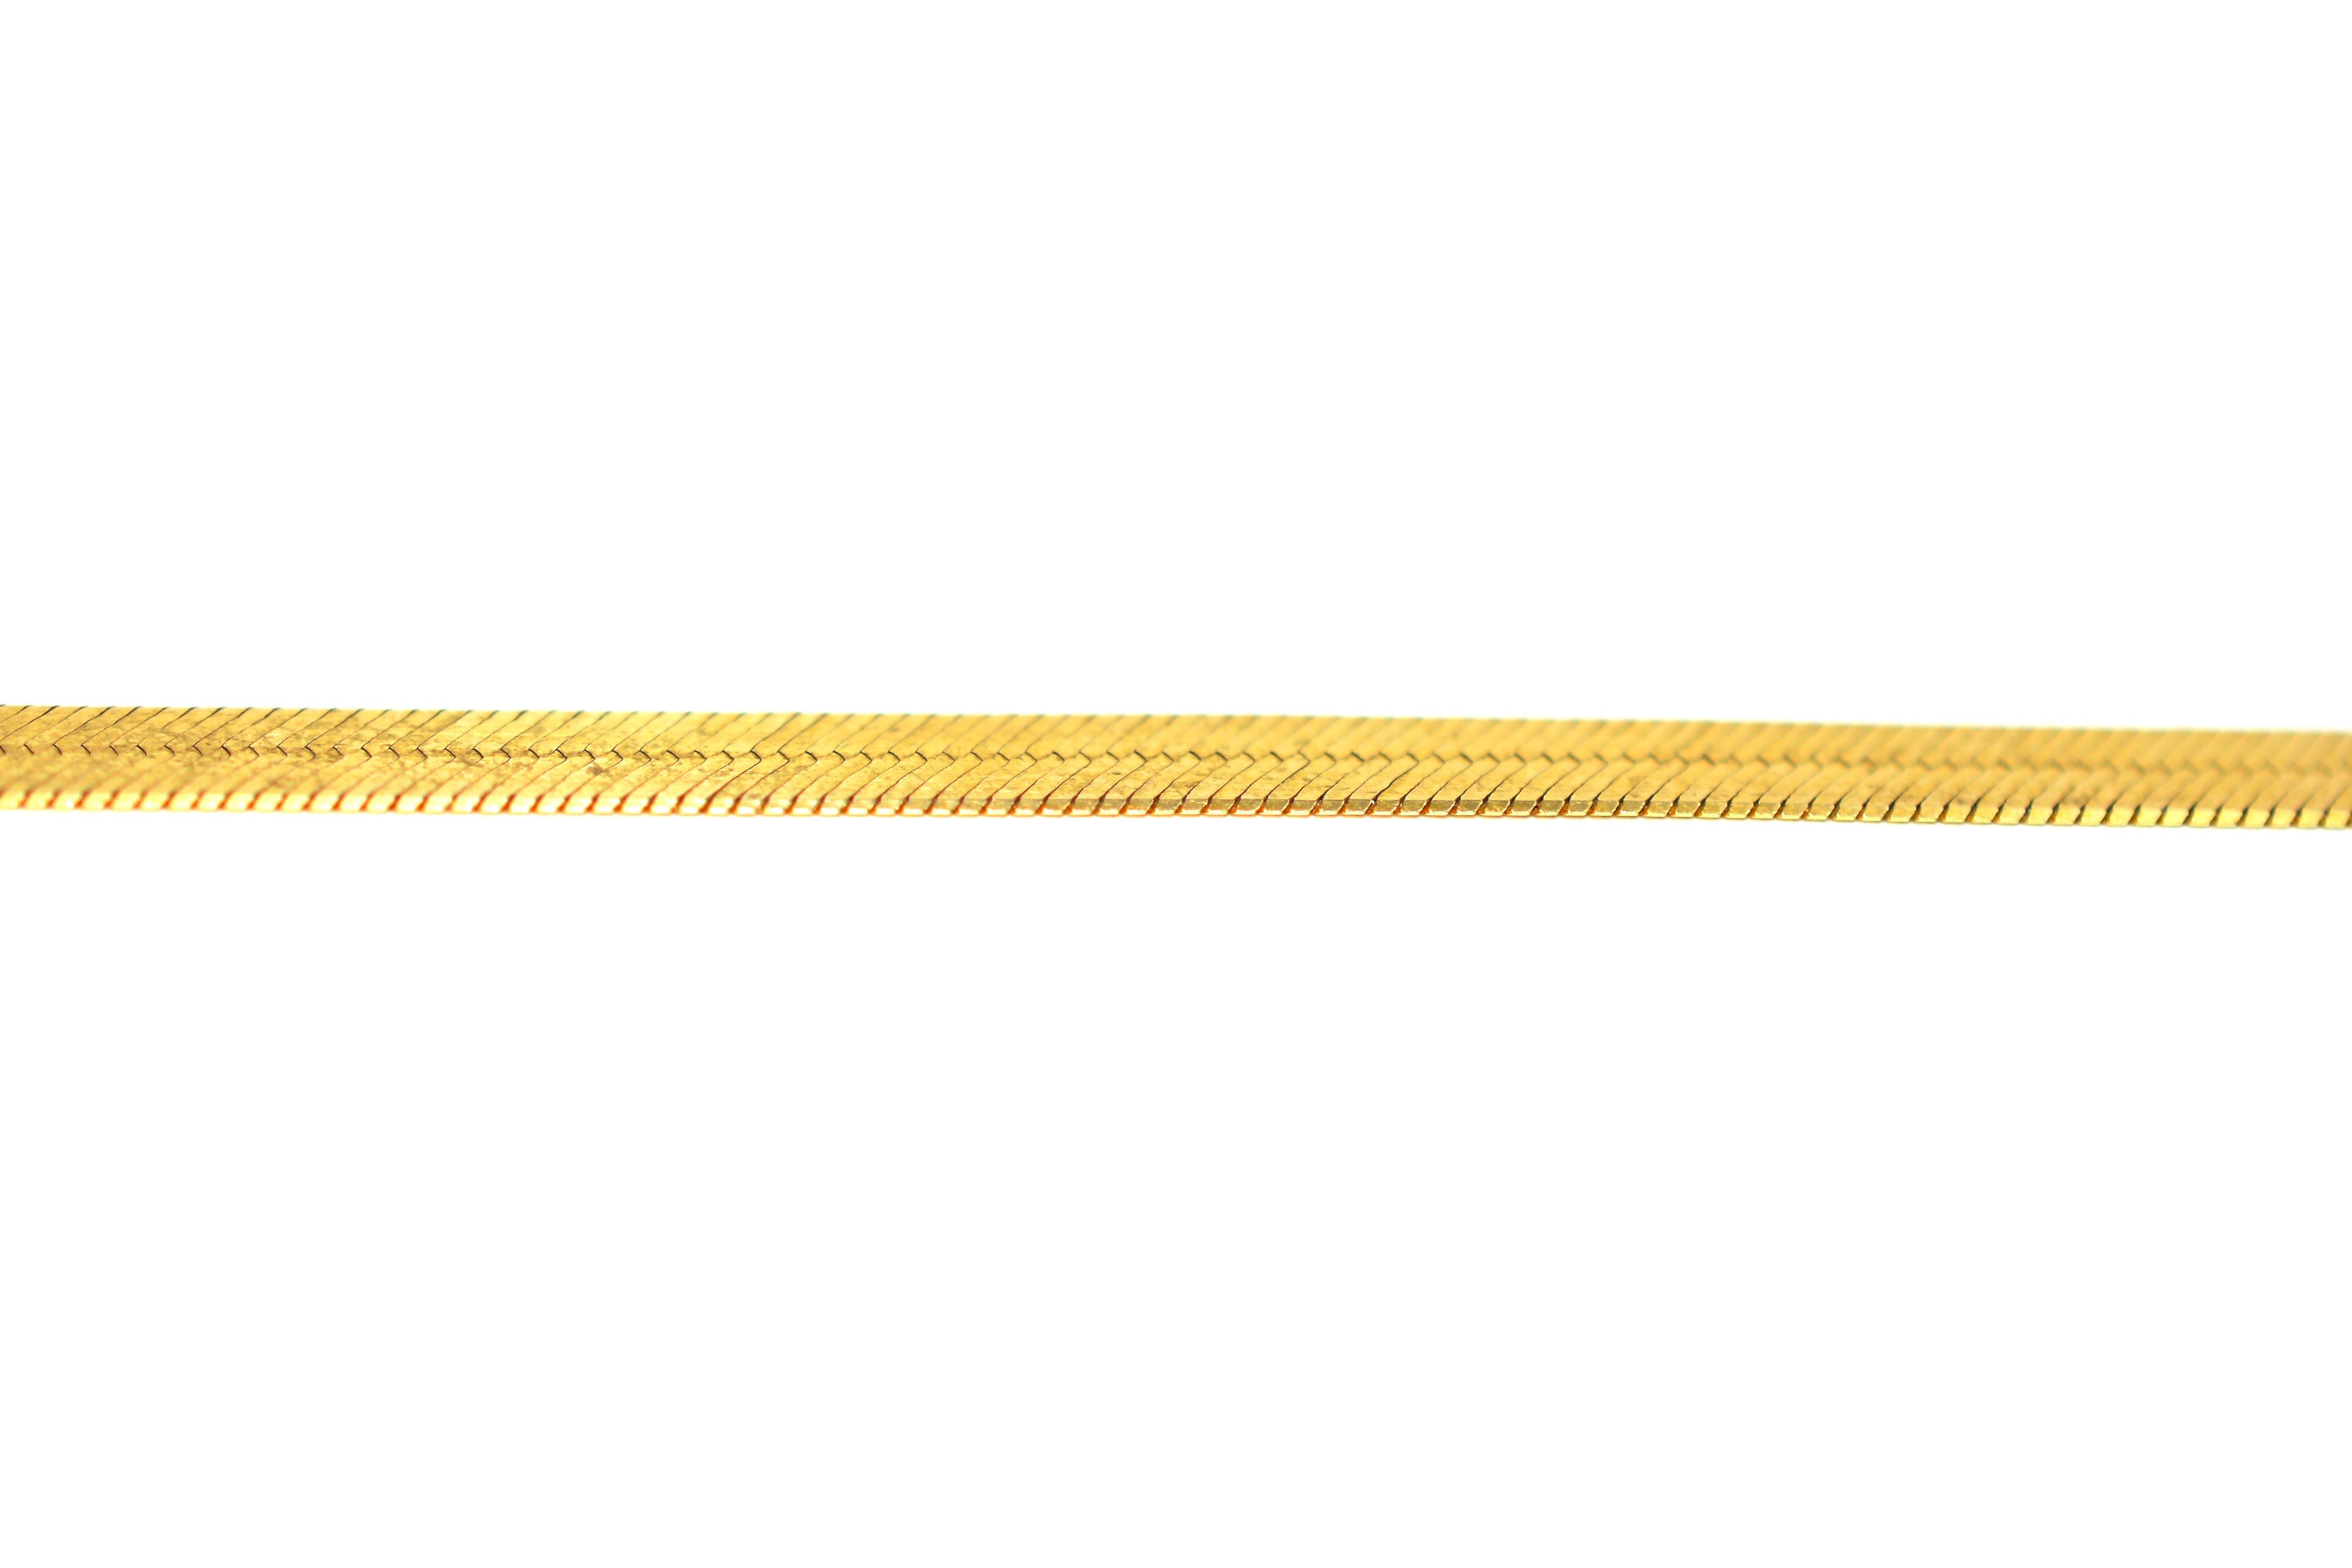 14K Solid Gold Herringbone Chain Necklace Gold Necklace Gold Chain Unisex Necklace Snake Chain Necklace Flat Chain Necklace Vintage Jewelry